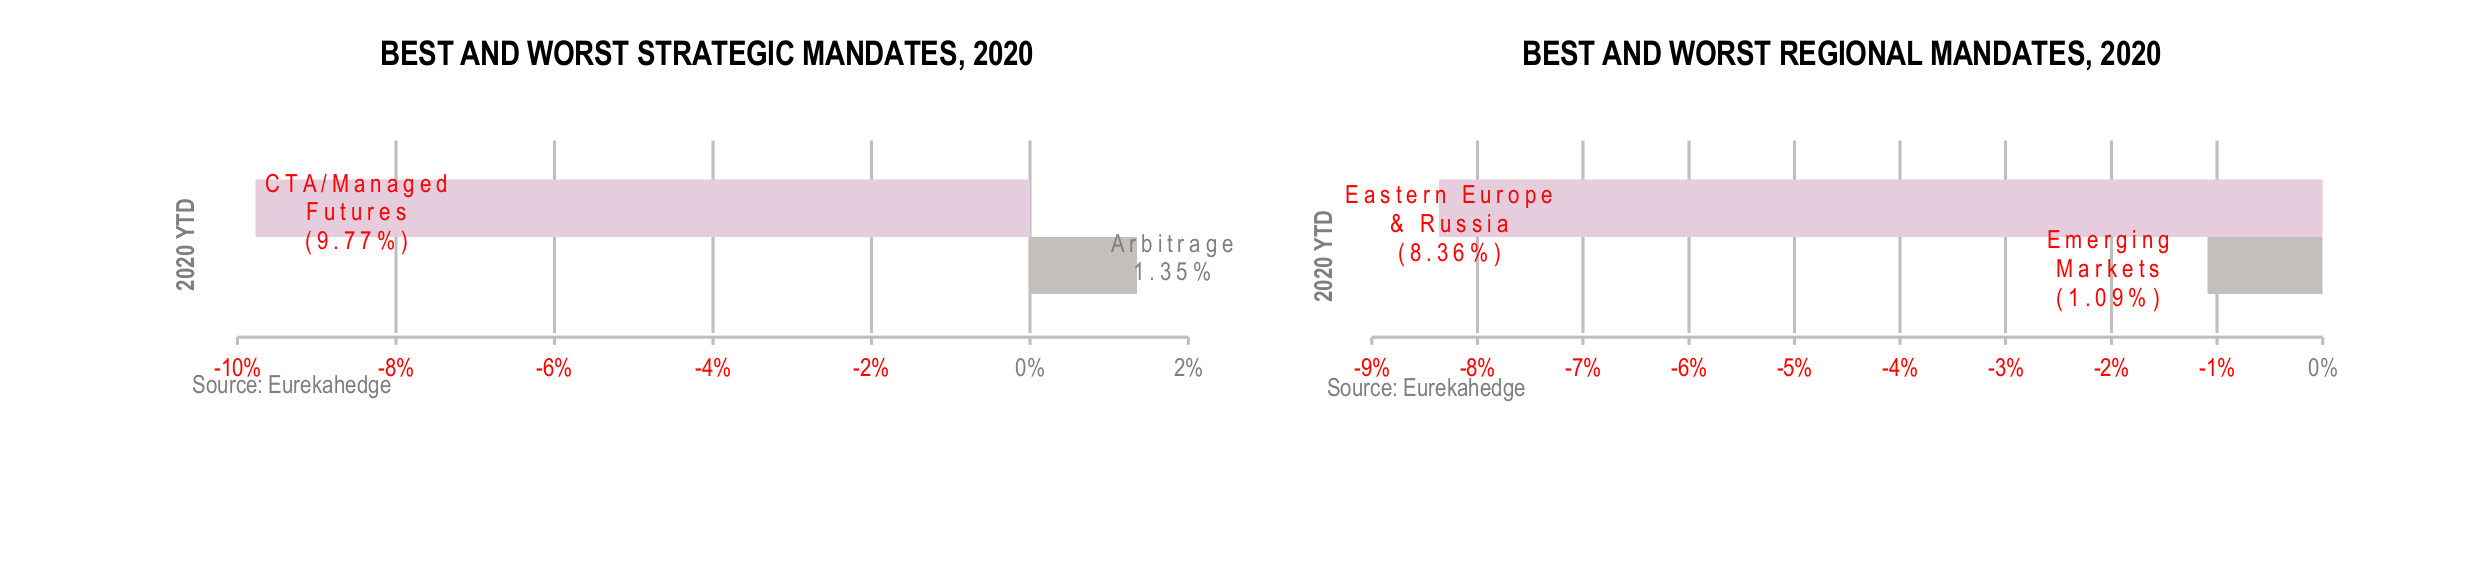 European Hedge Funds Infographic April 2020 - best and worst strategy and regional mandate 2020